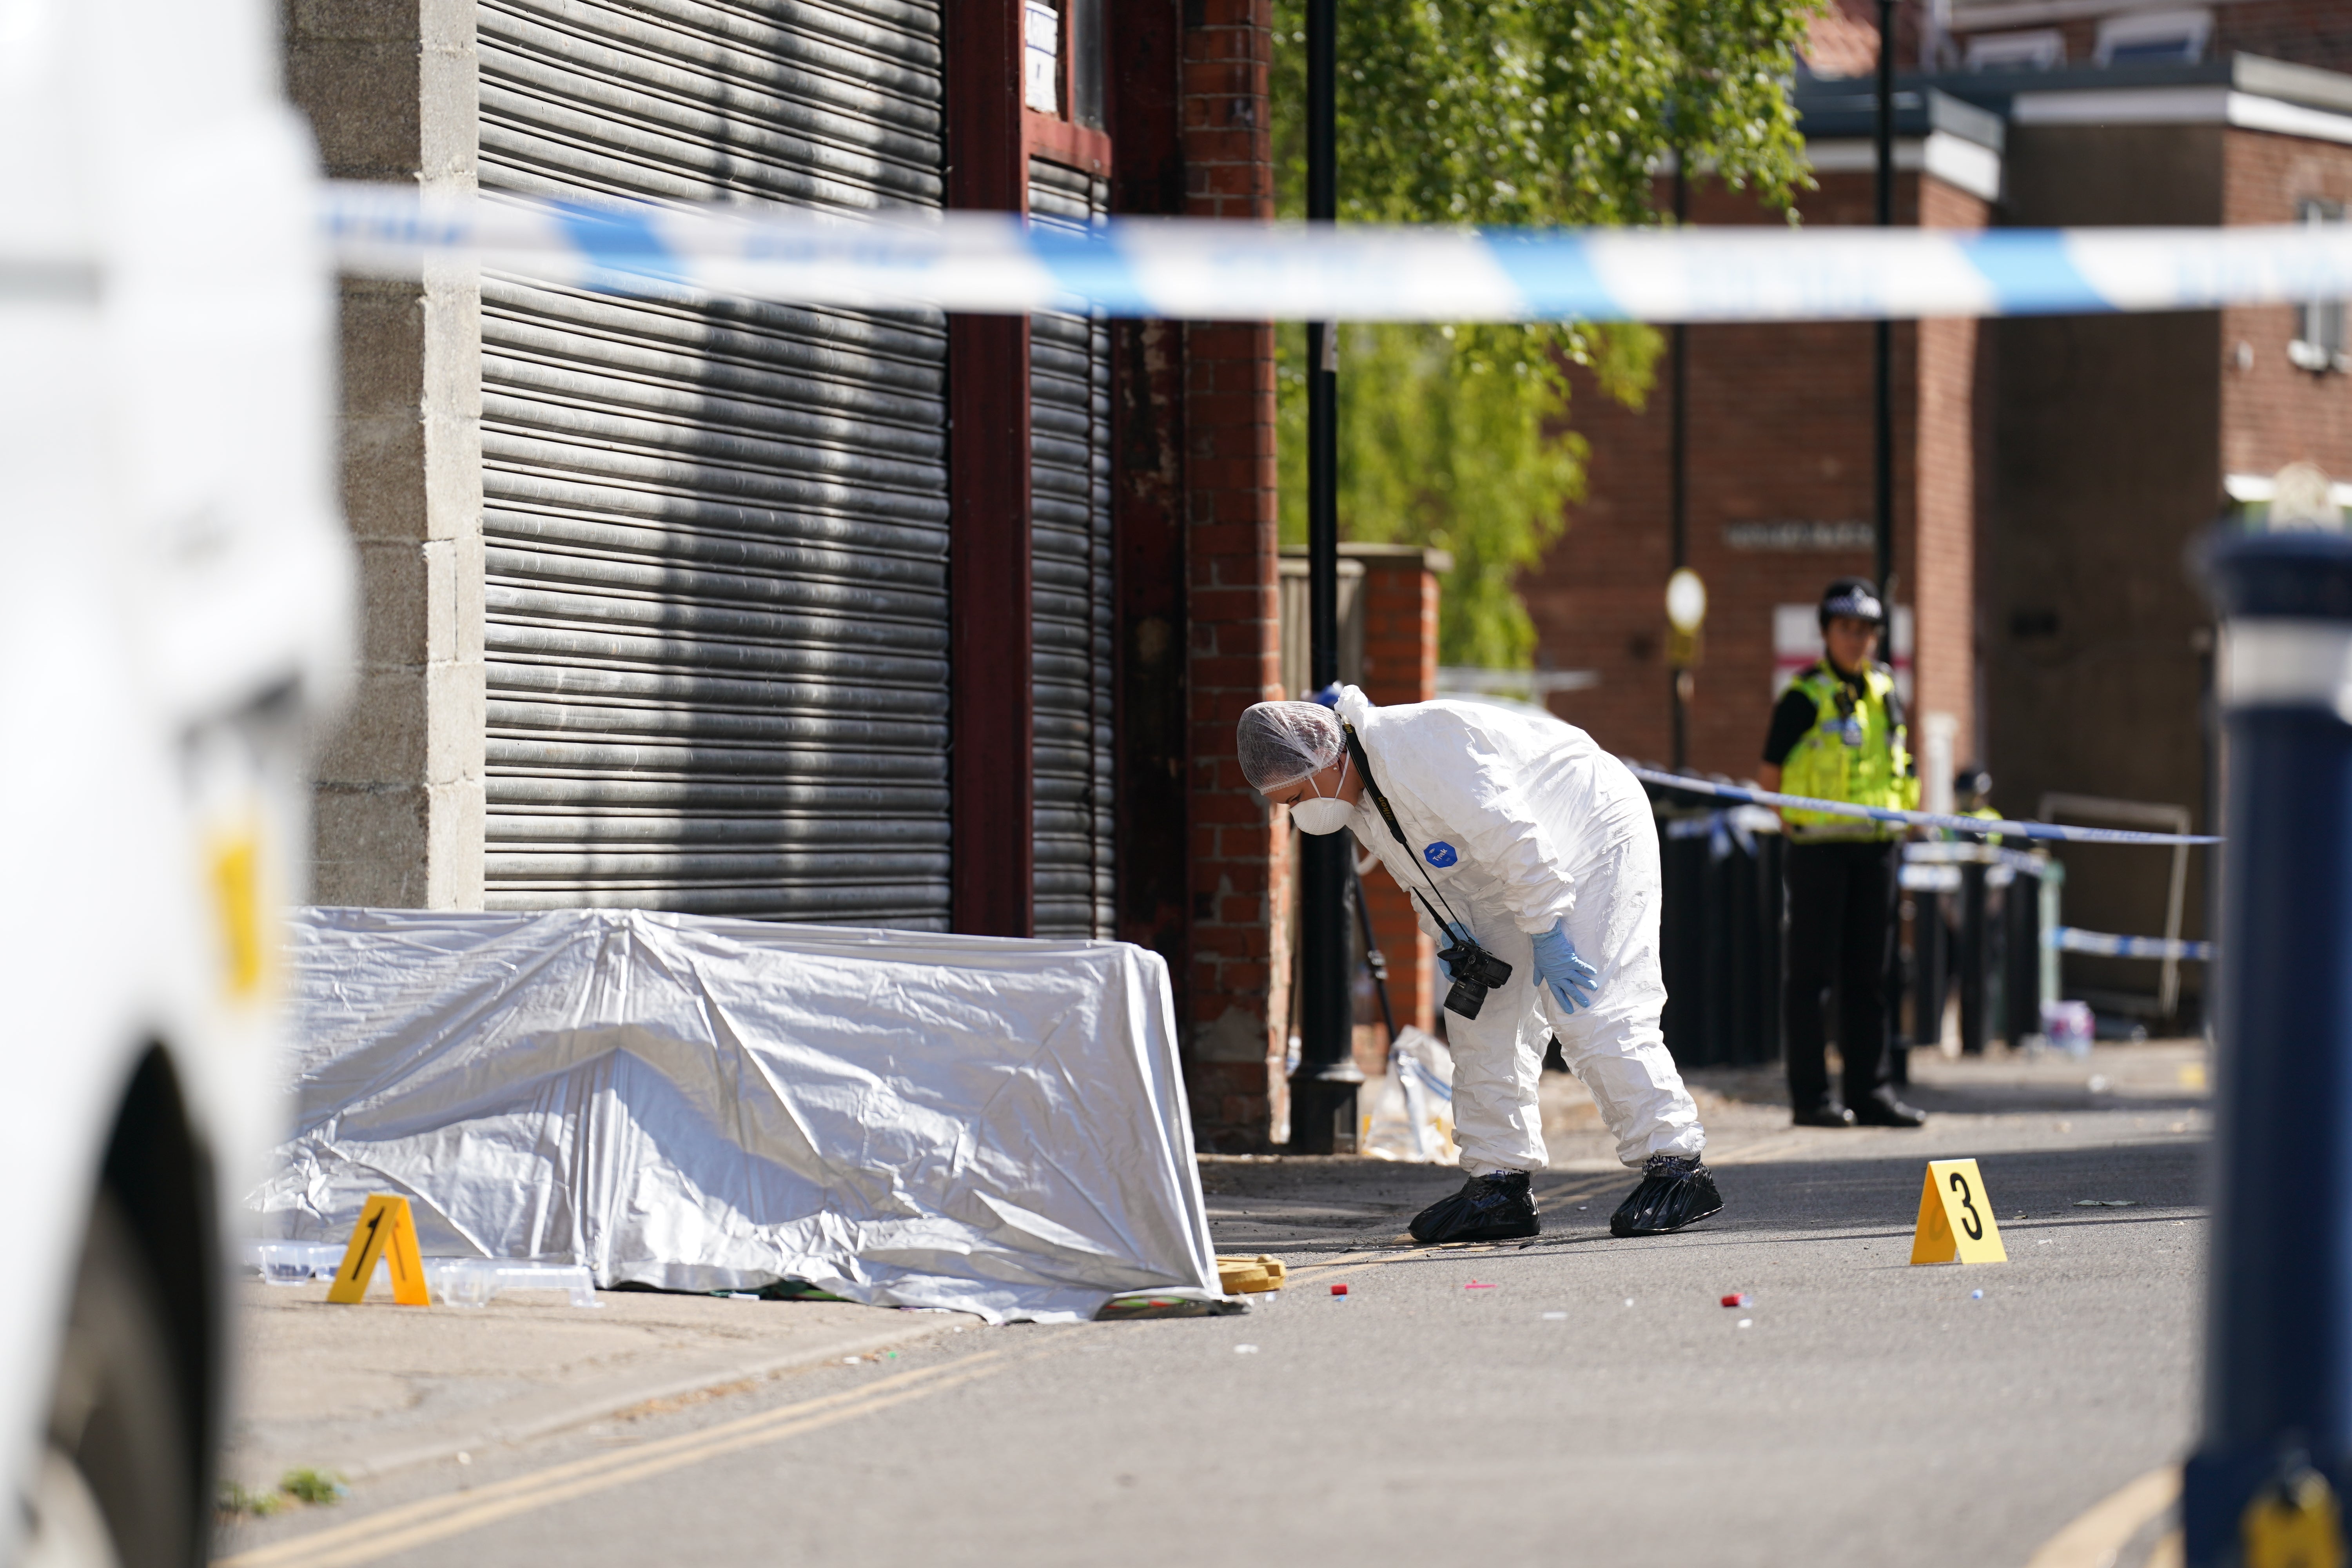 A forensic officer near the scene